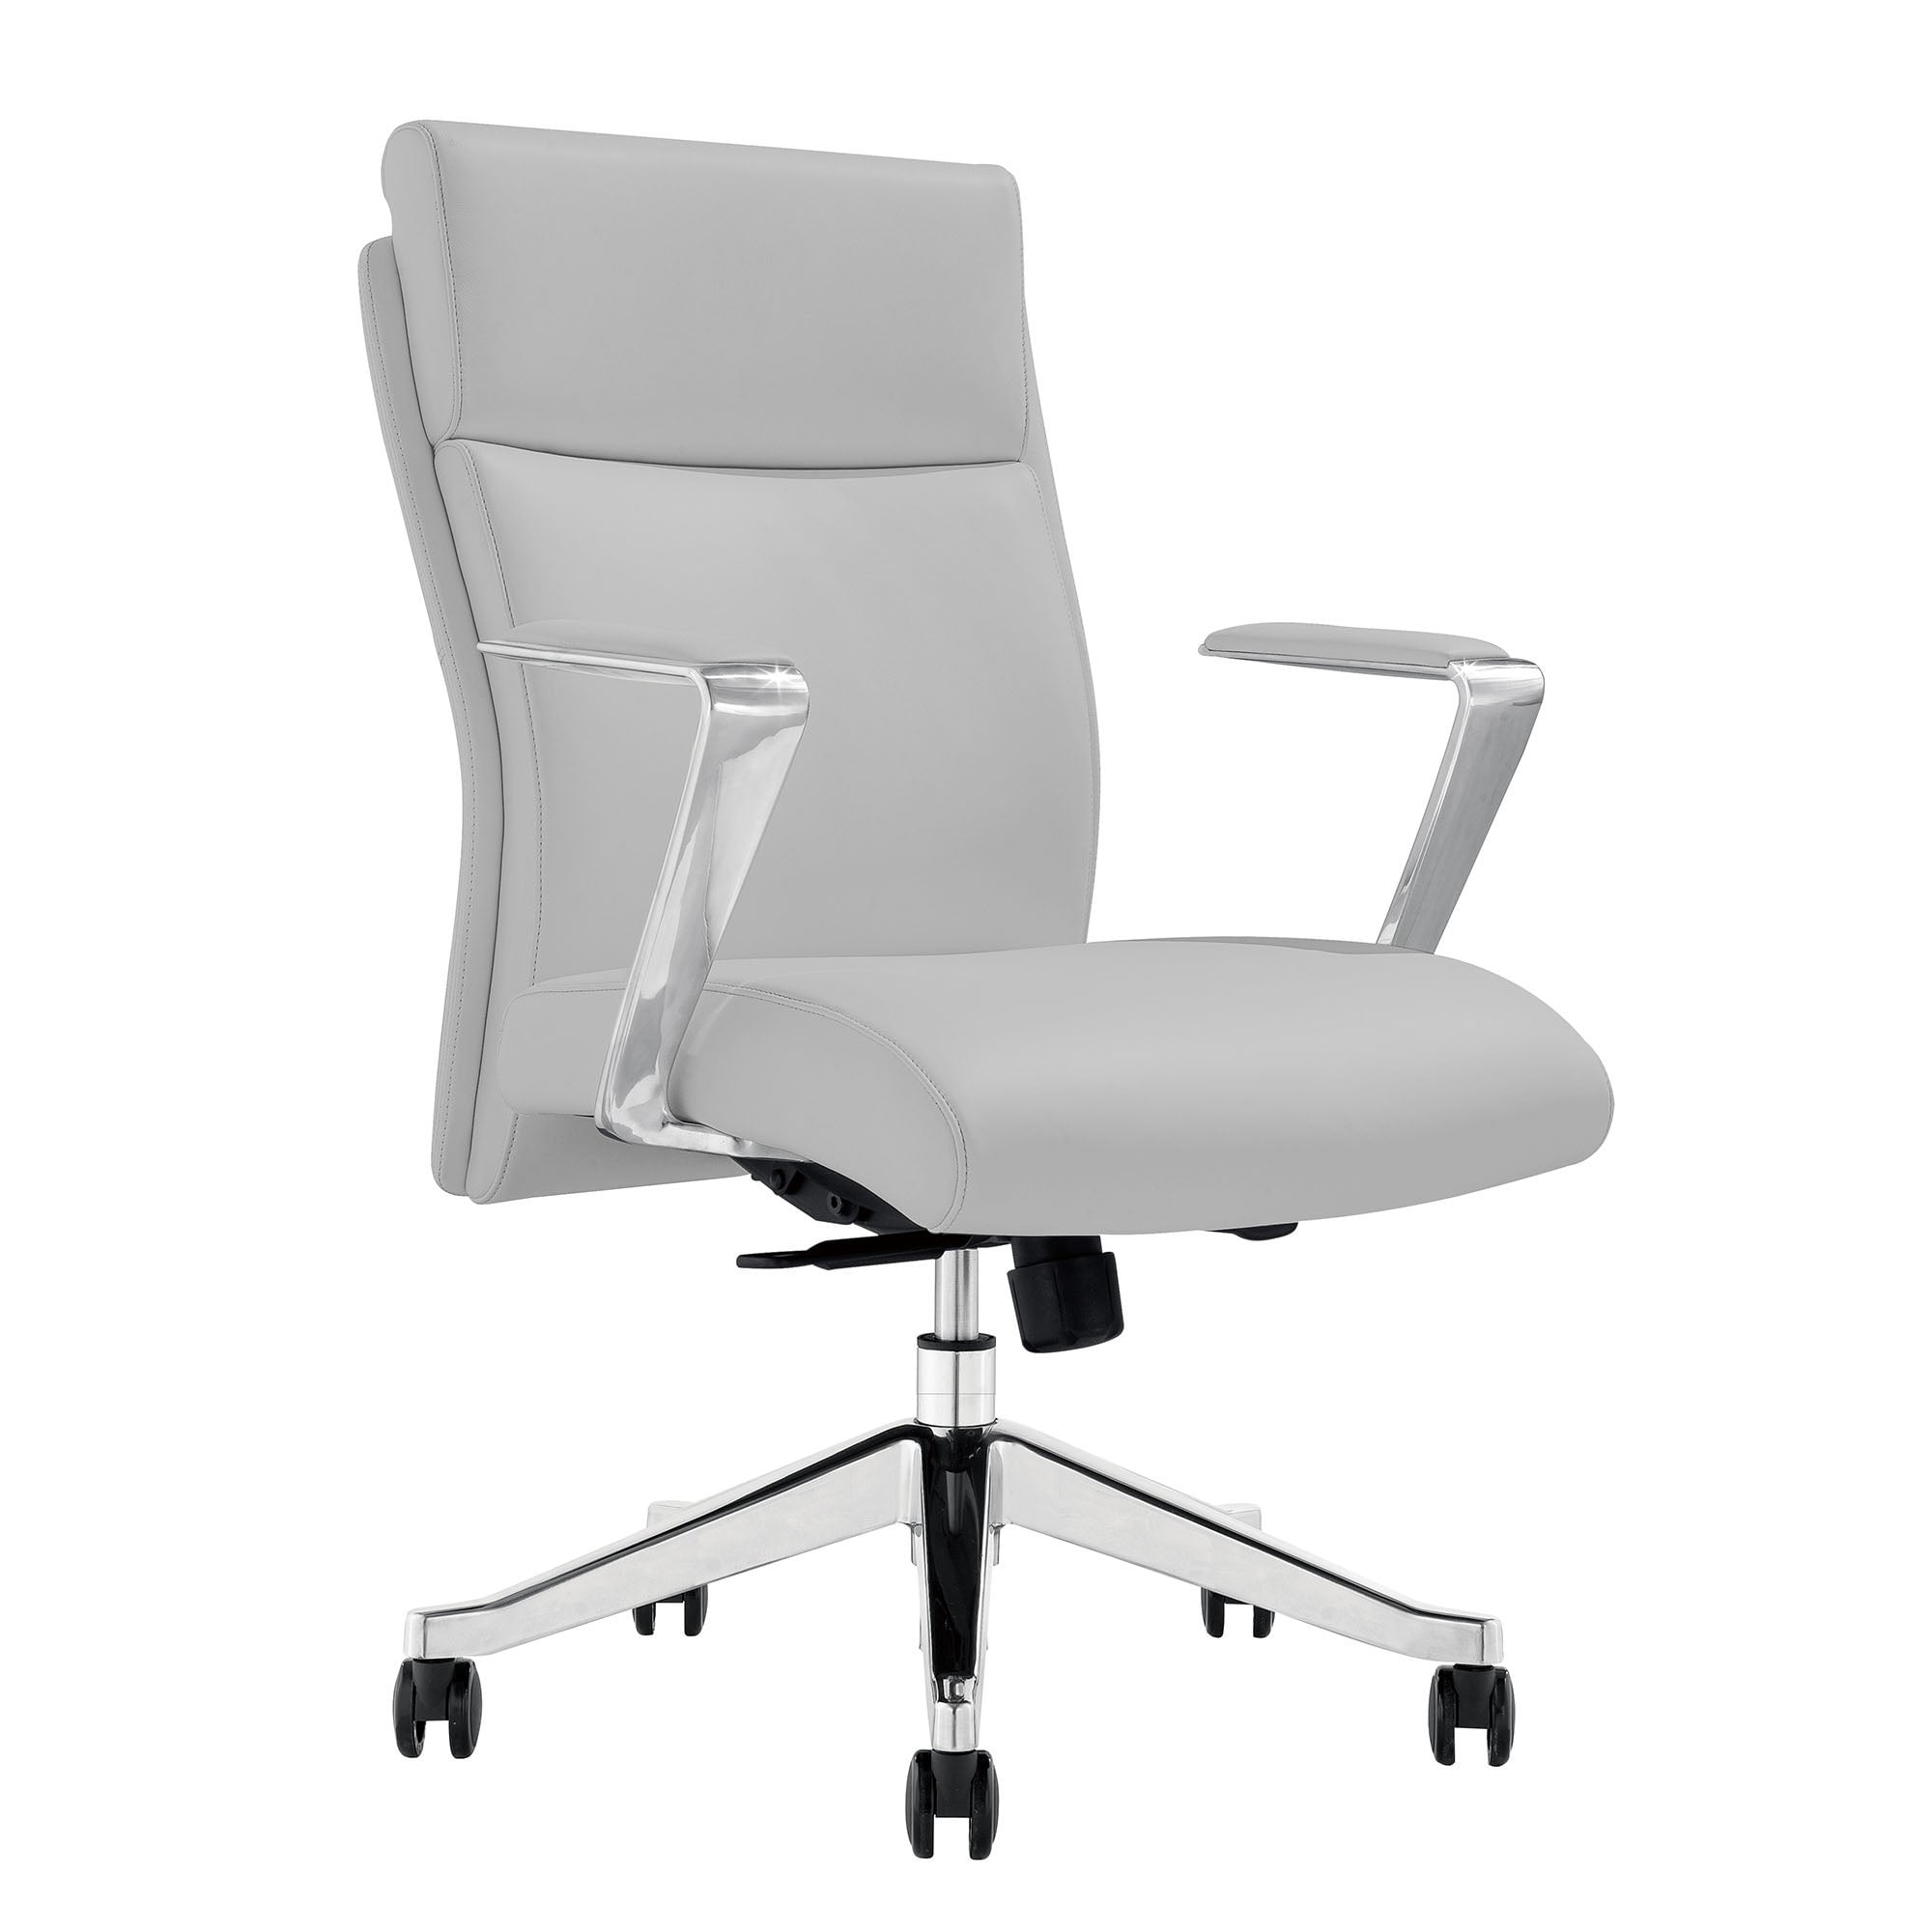 White Frame with Headrest Adjustable Armrests and Aluminum Alloy FCD Ergonomic Multi Function Mesh Office Chair in Black with Lumbar Support